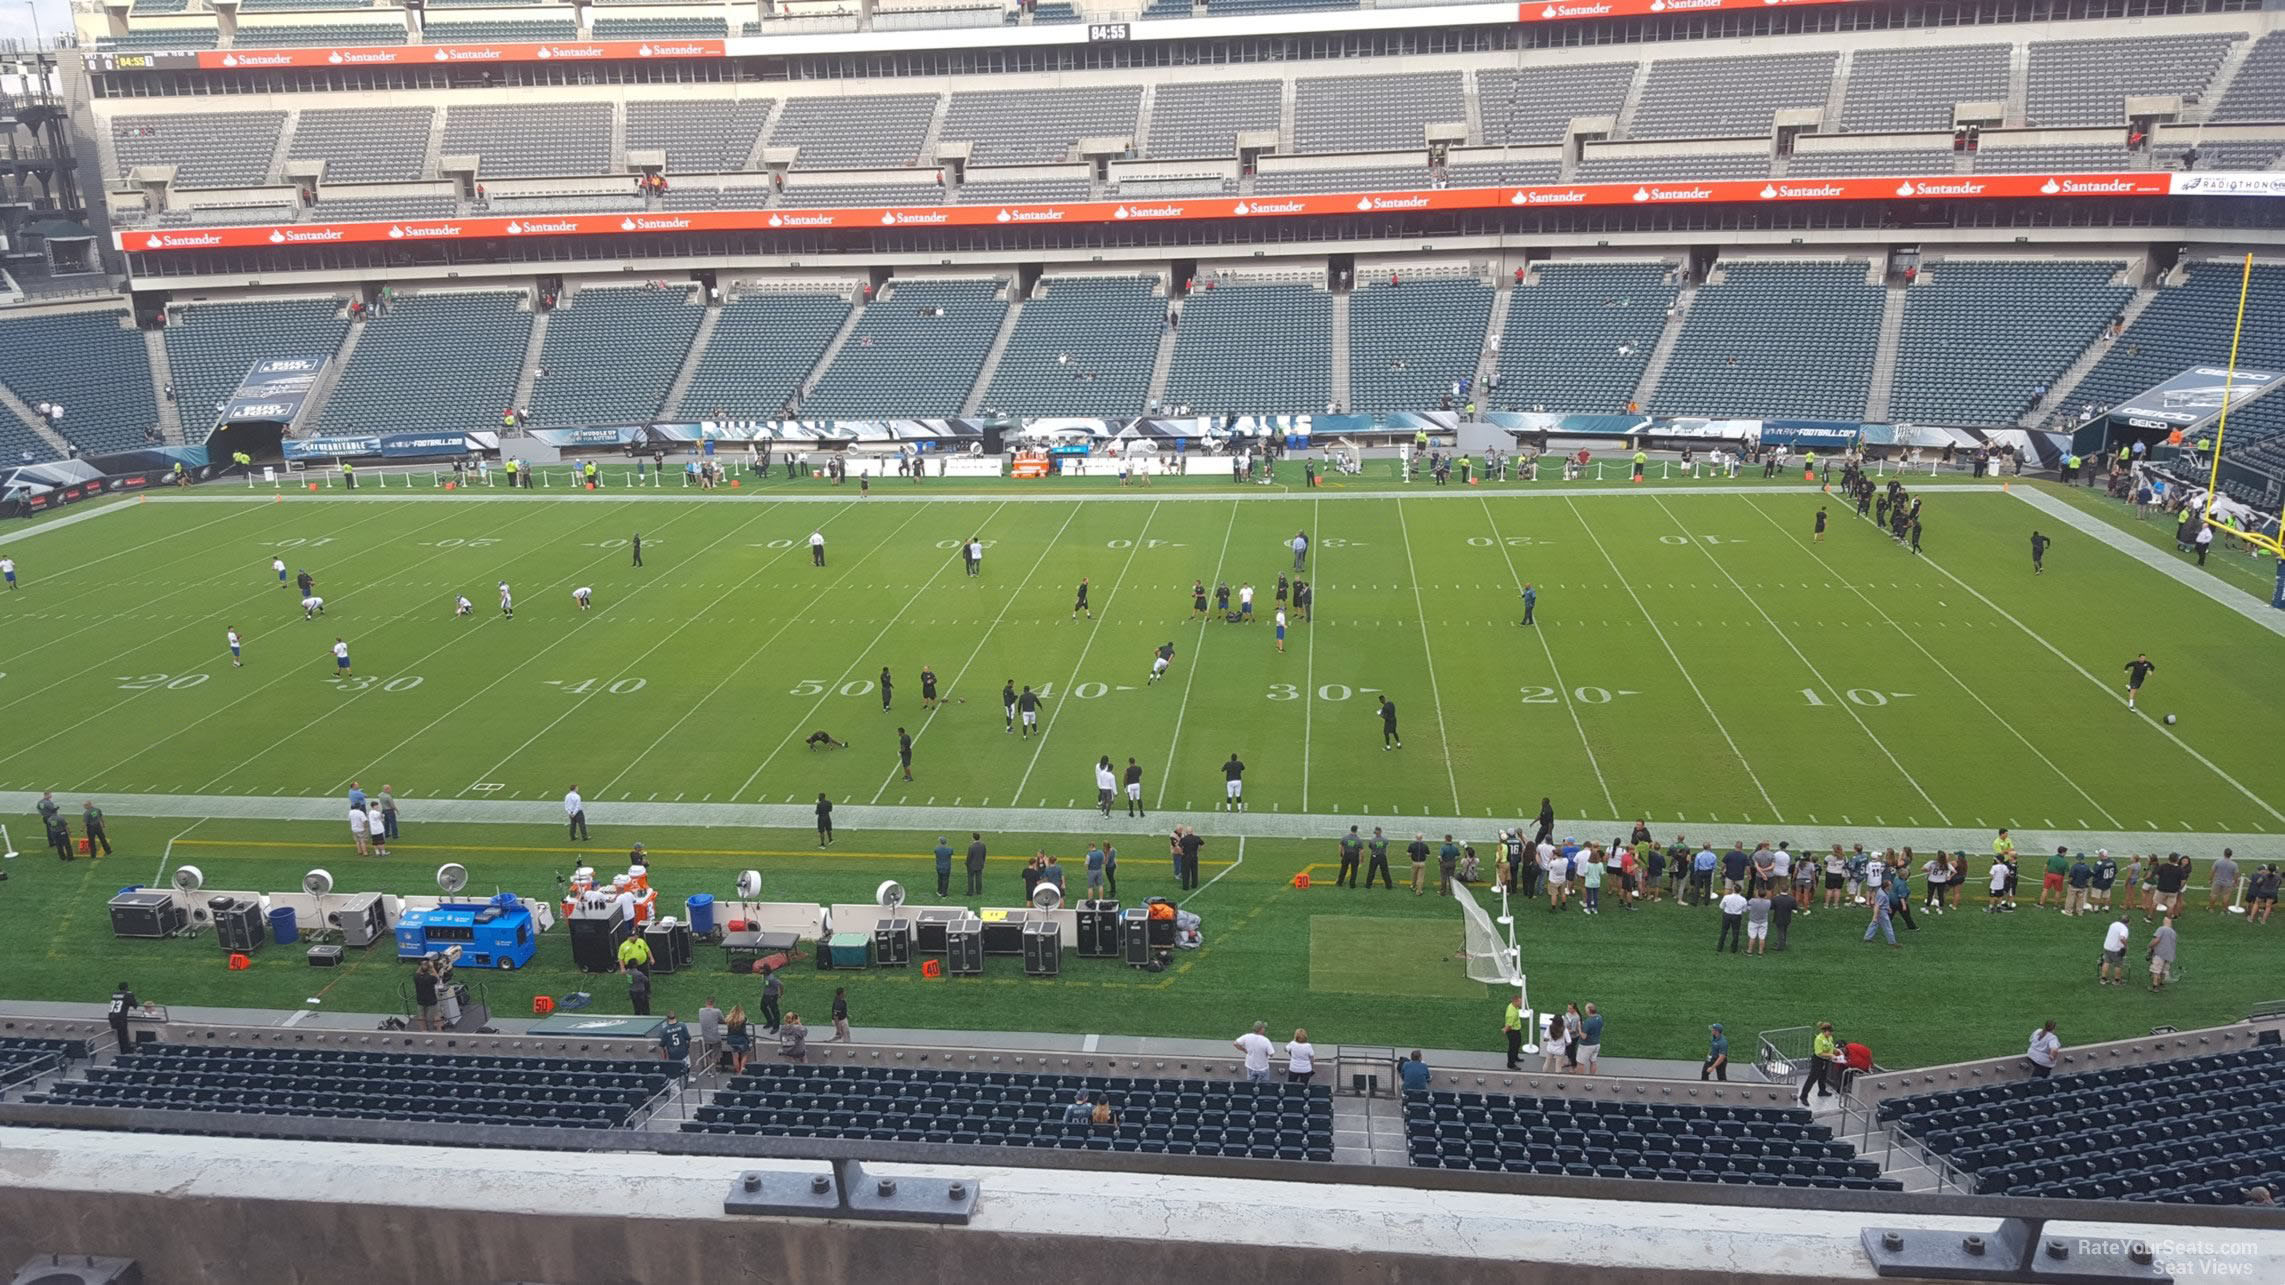 section c2, row 7 seat view  for football - lincoln financial field